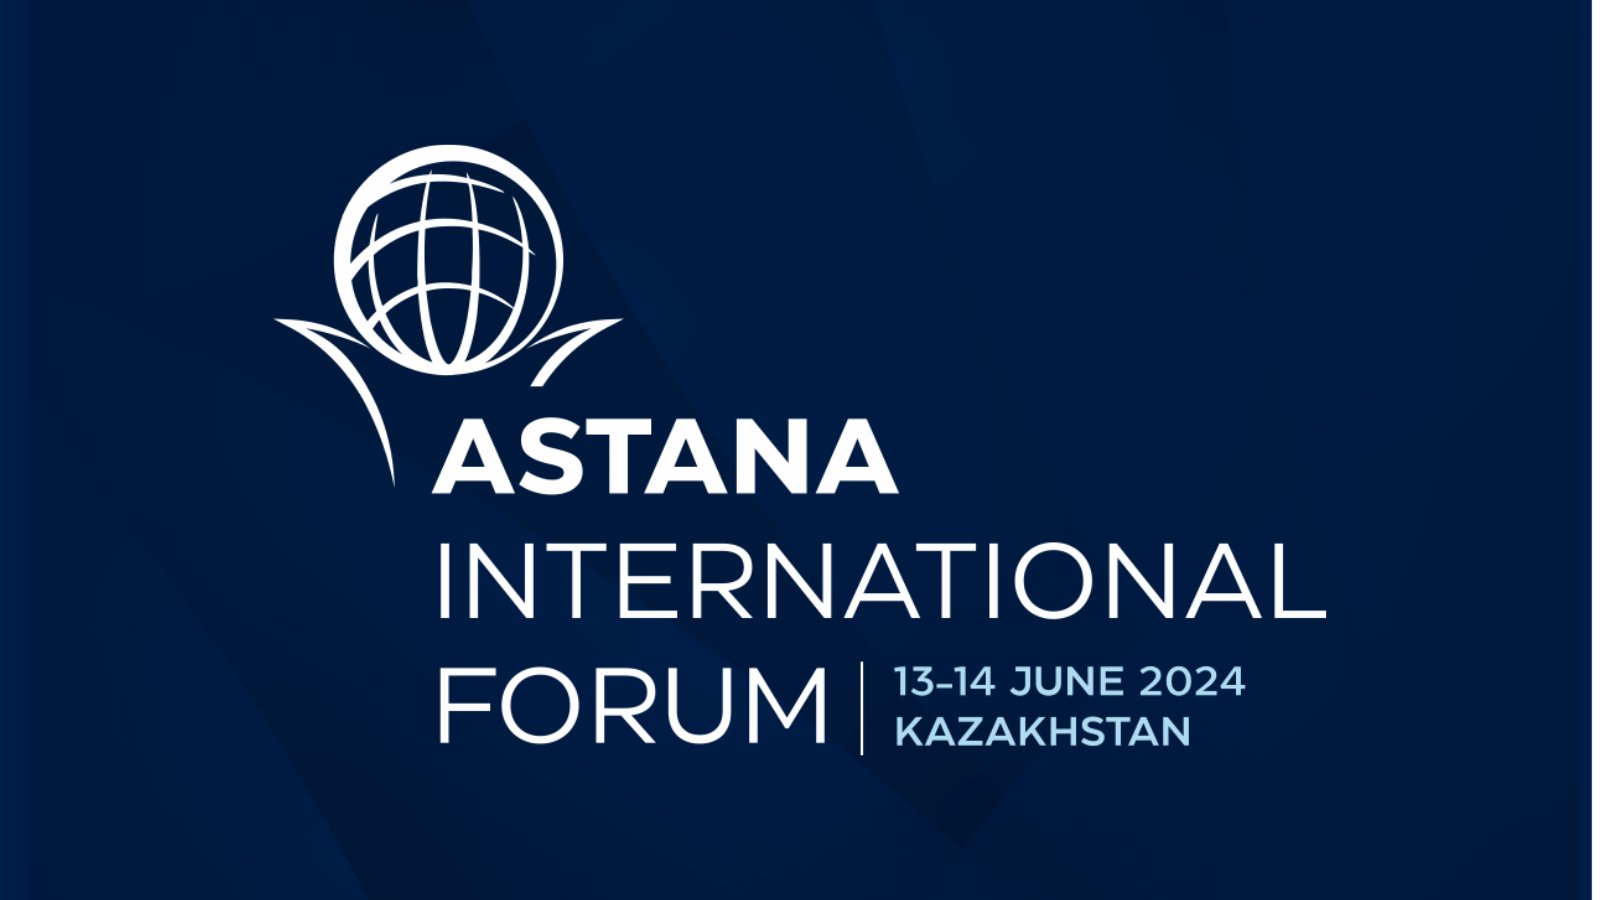 Astana International Forum 2024: A Call to Action for Global Collaboration - ANALYSIS